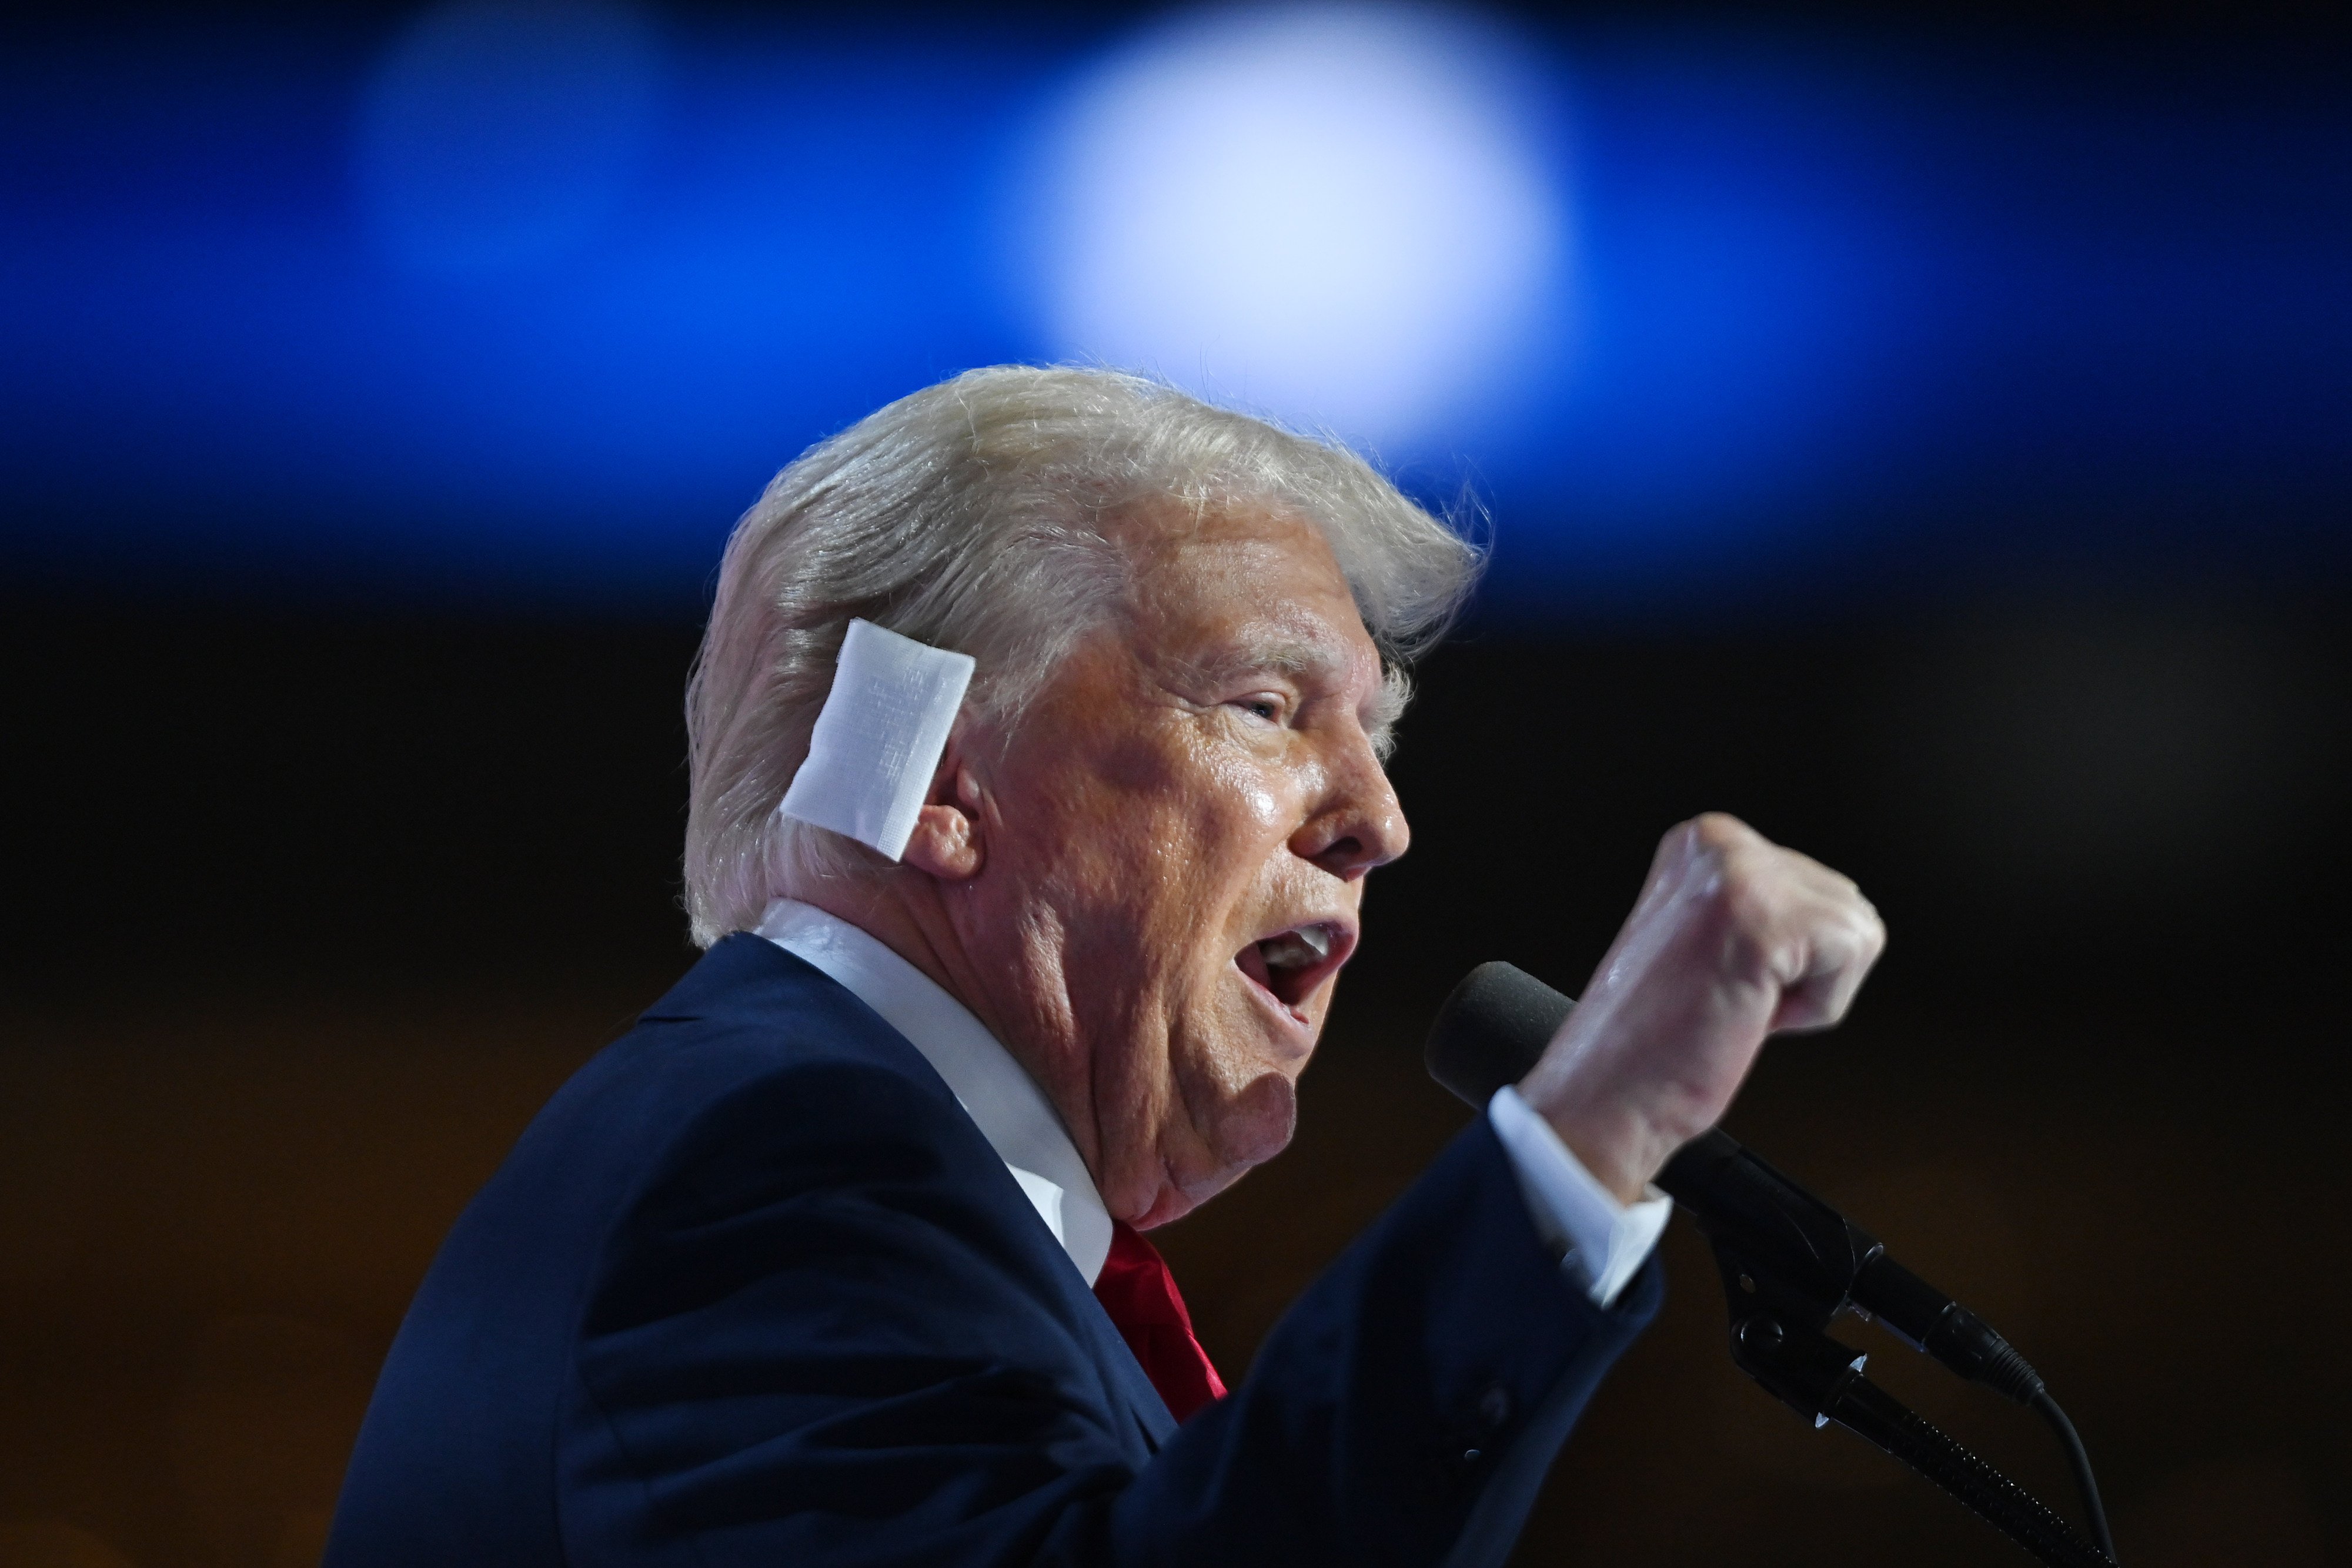 Trump appeared more “cautious” and “measured” in his acceptance speech this time than eight years ago, according to one Chinese analyst. Photo: Xinhua